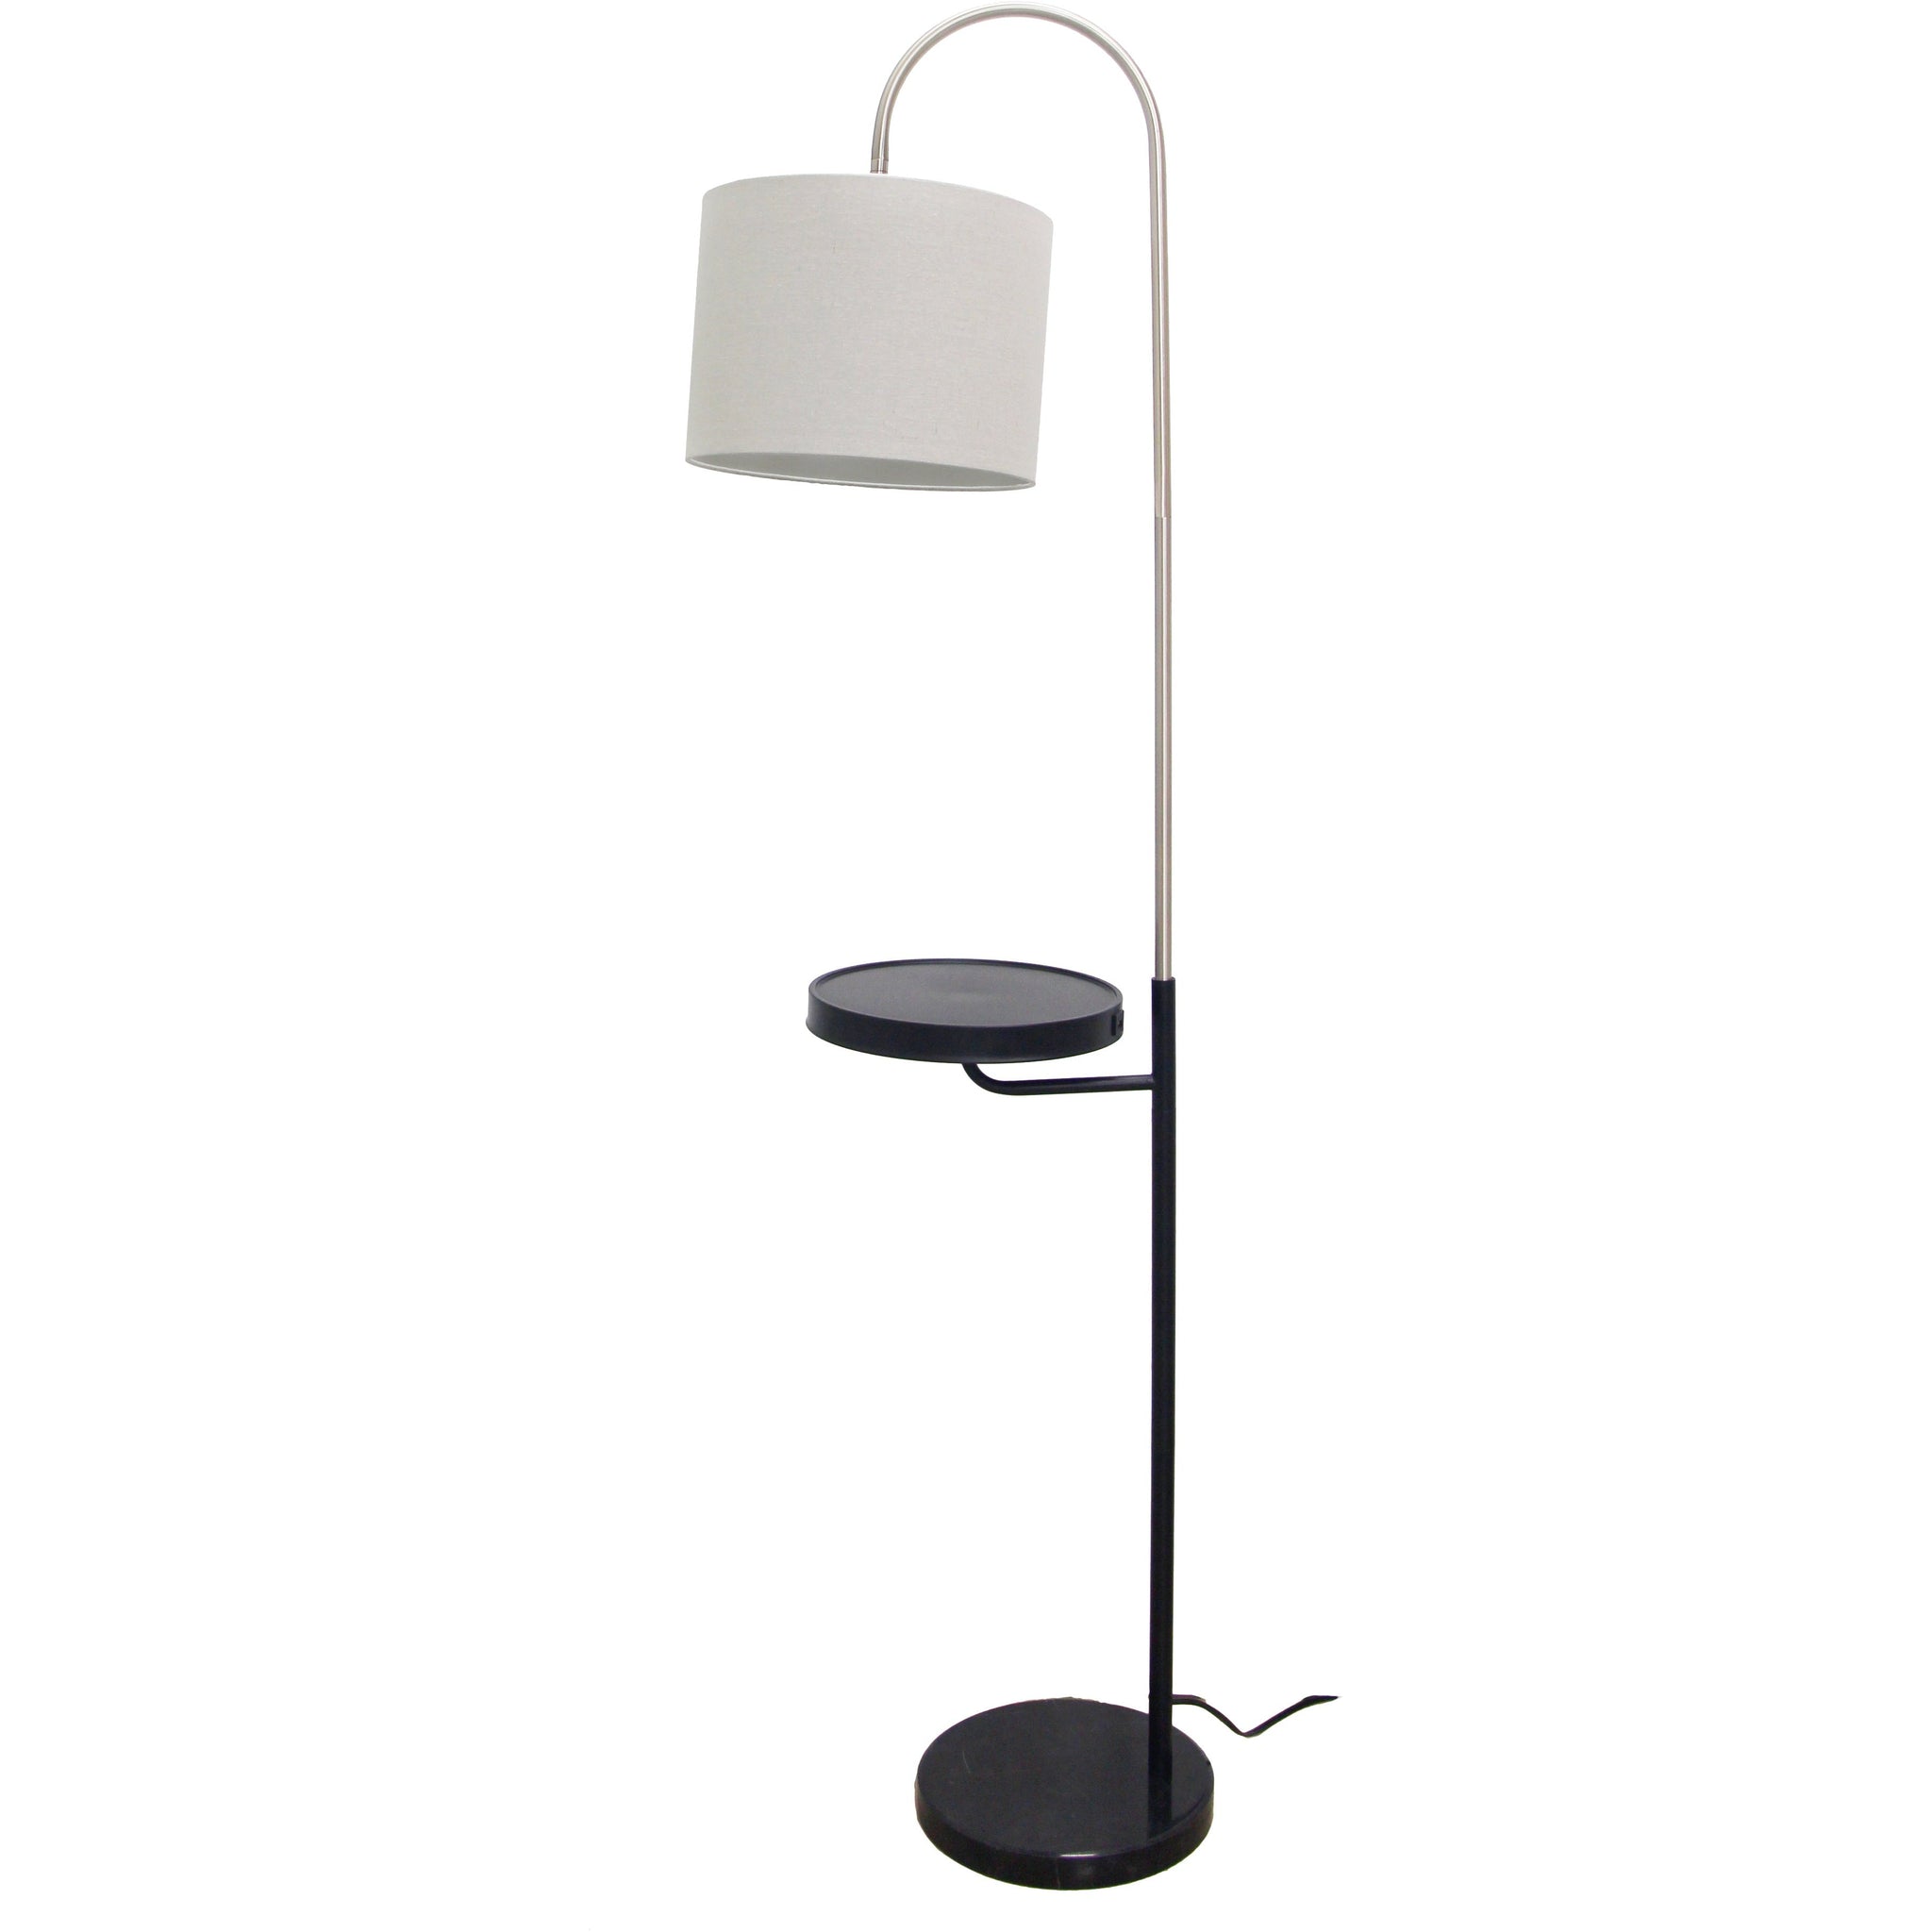 Melissa 65" Floor Lamp with Tray and USB